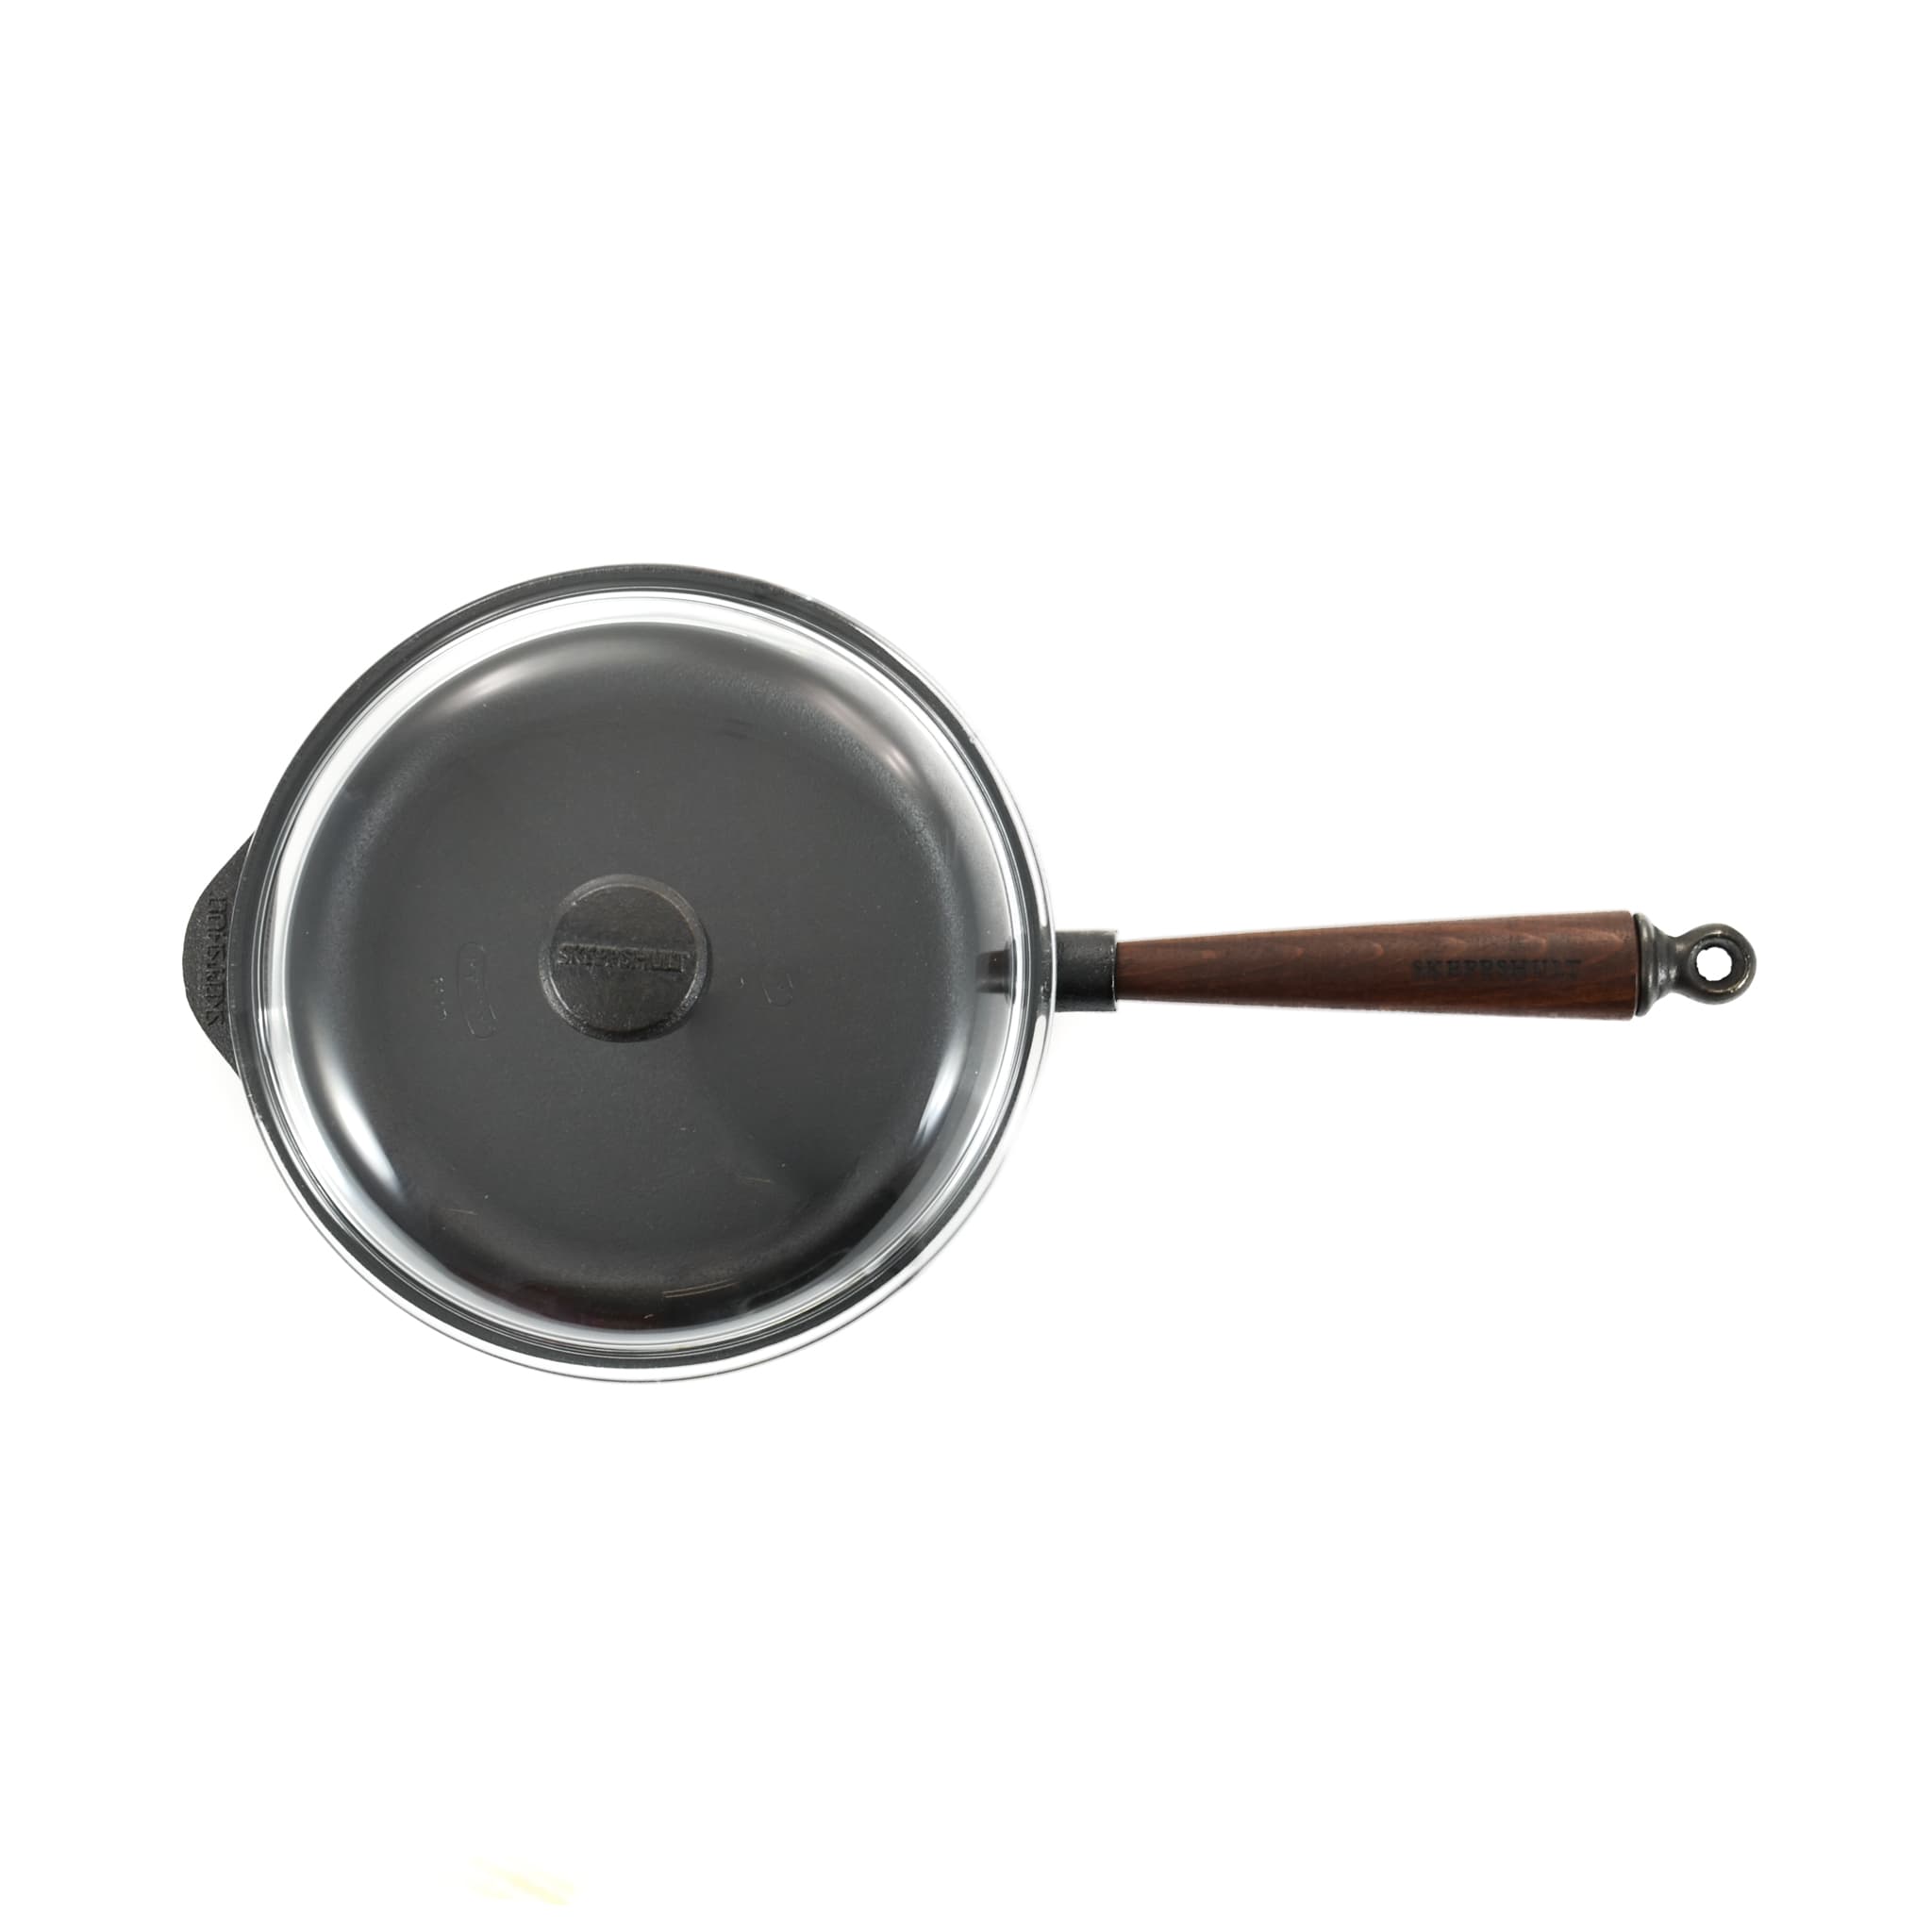 Skeppshult Traditional Cast Iron Deep Saute Pan with Lid, 25cm